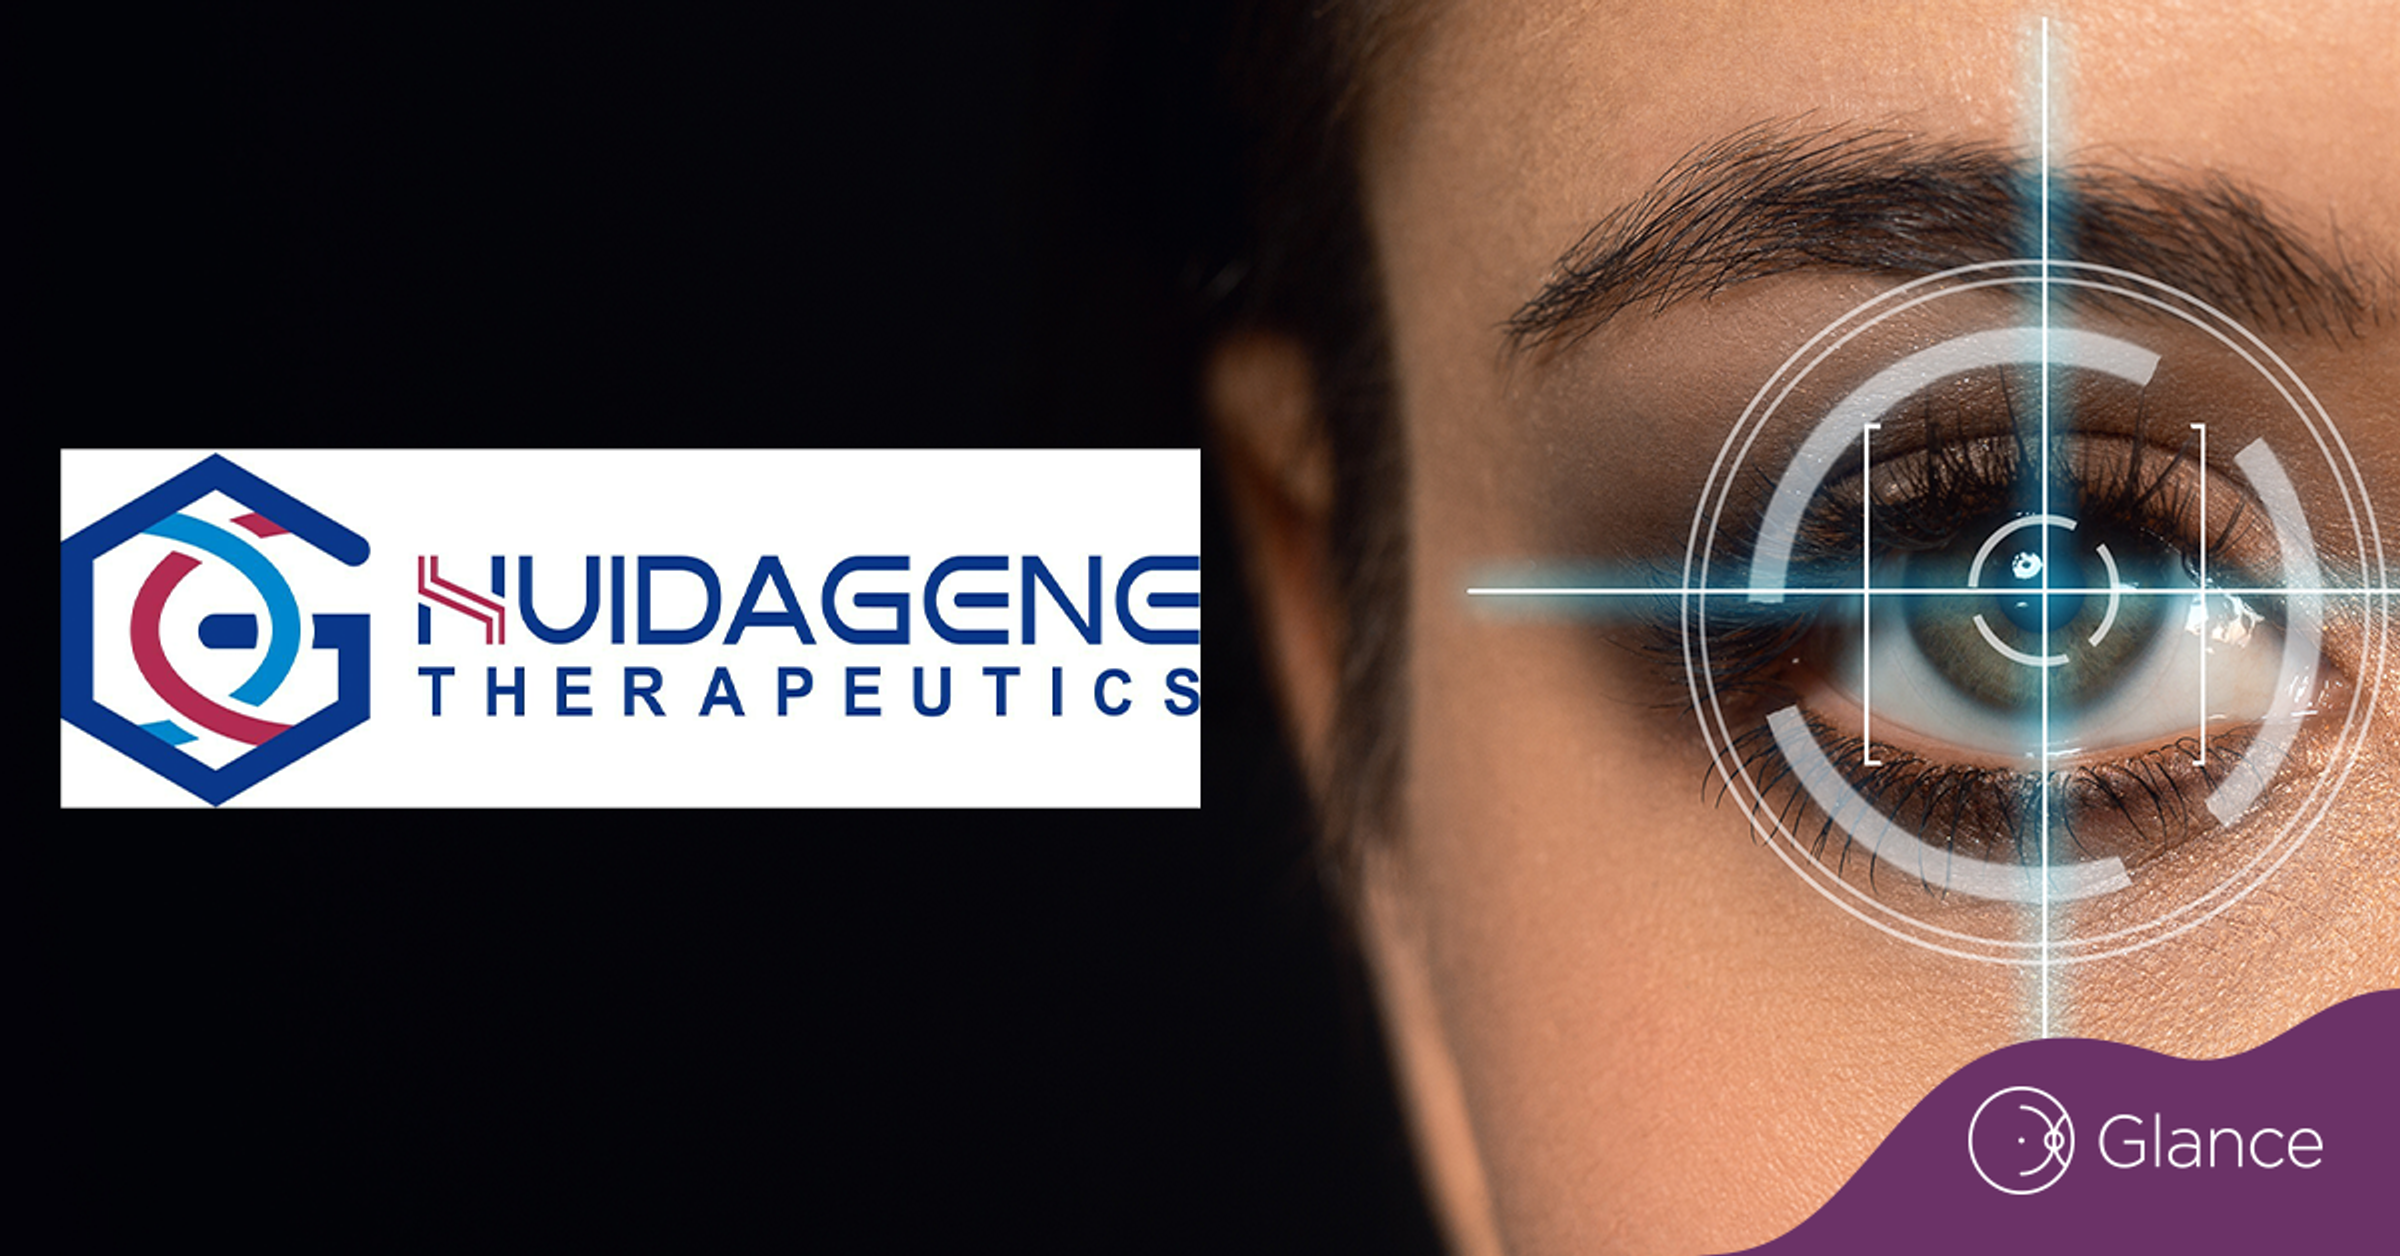 FDA clears HuidaGene for IND, multi-national IRD trial